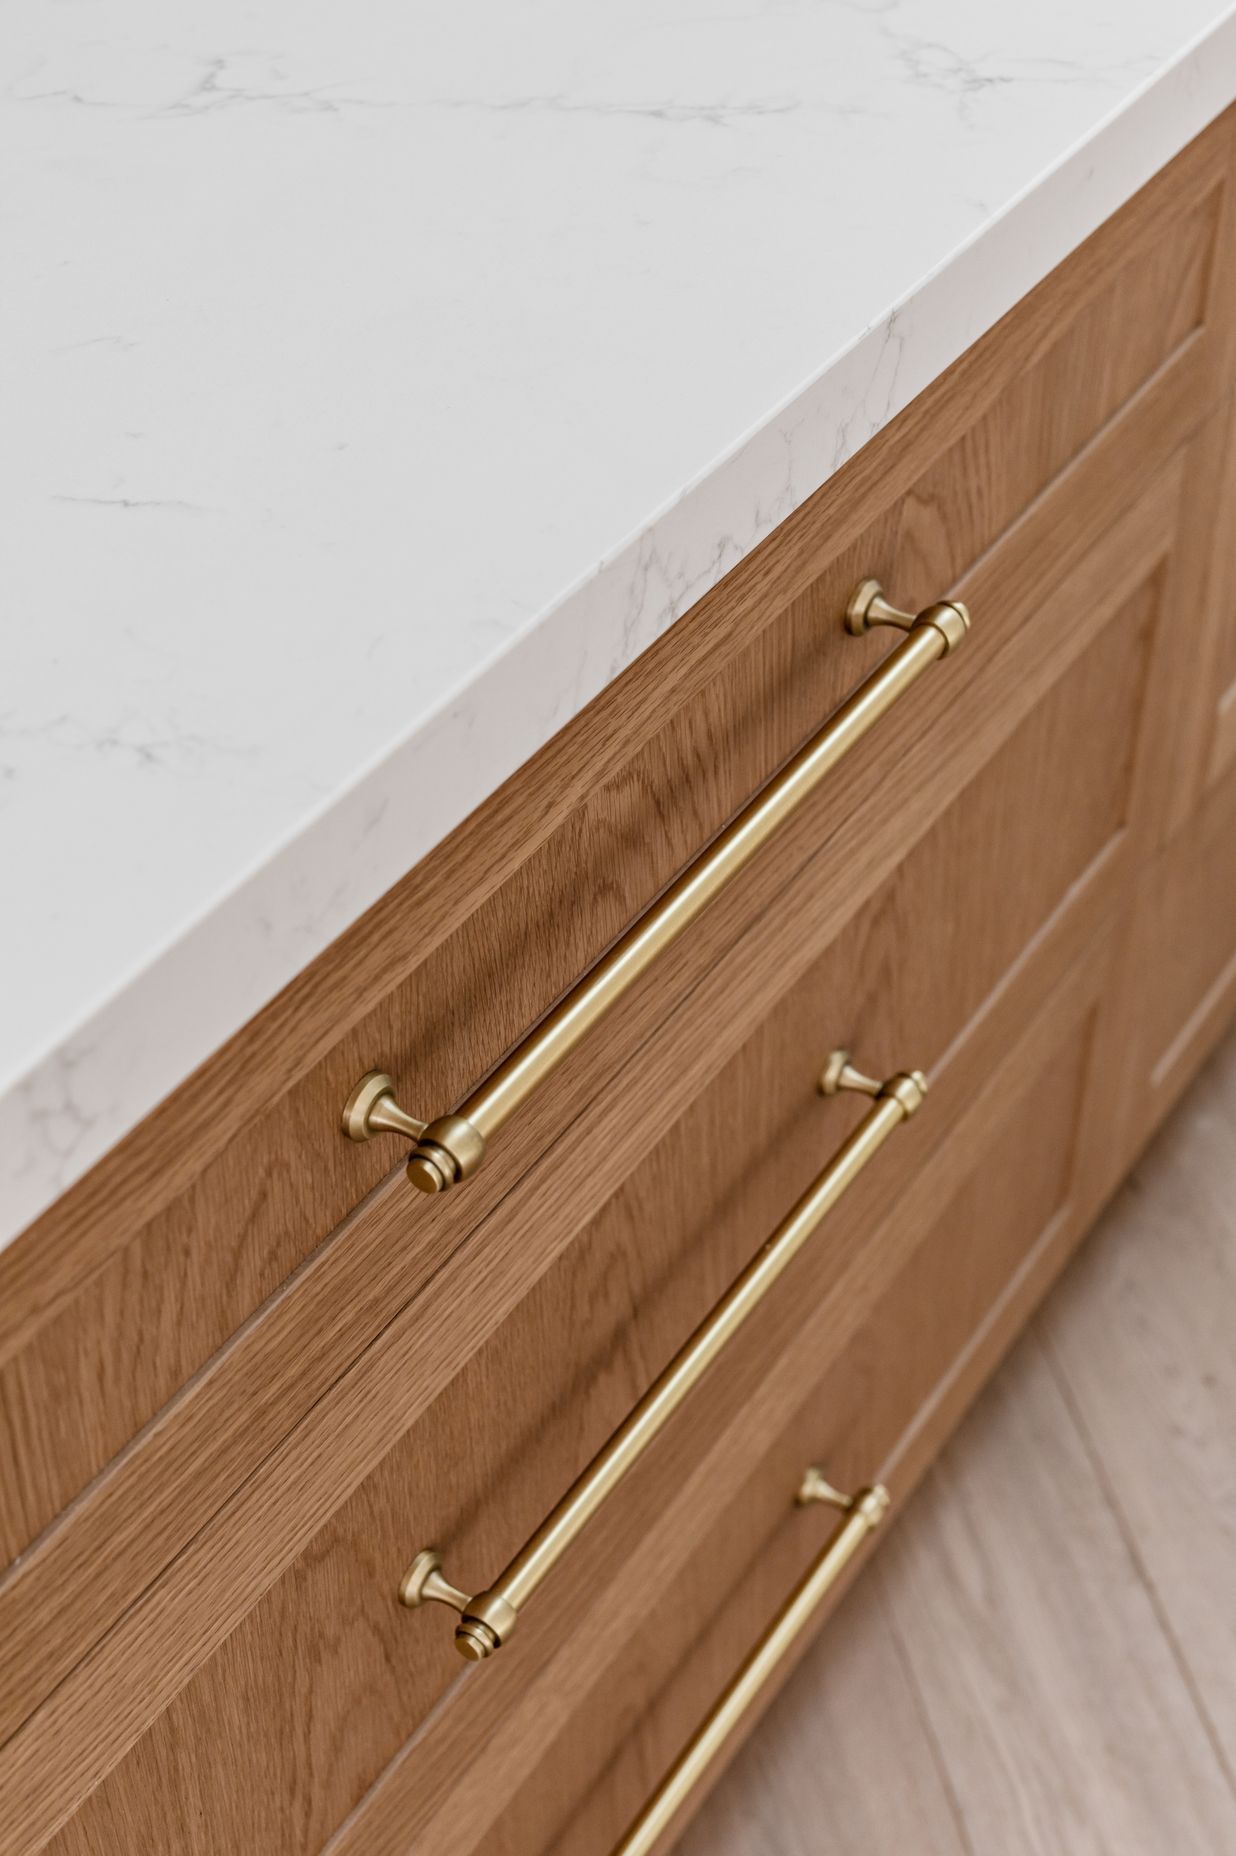 Featuring Mayfair Handle in Brushed Brass by Touch Handles